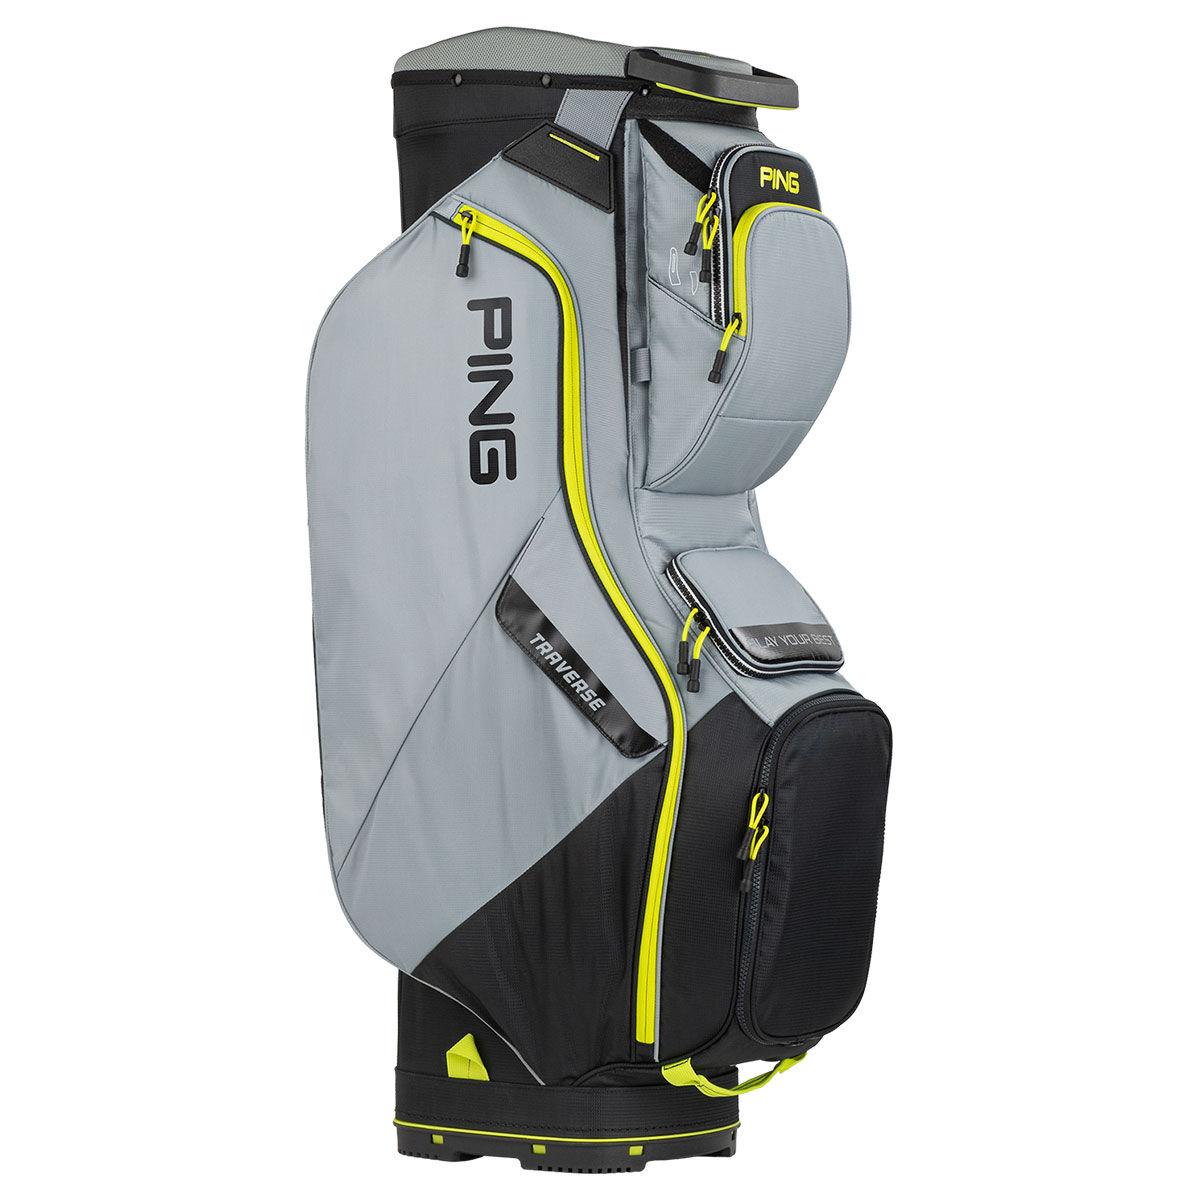 Ping Black, Grey and Yellow Lightweight Traverse Golf Cart Bag | American Golf, One Size von Ping